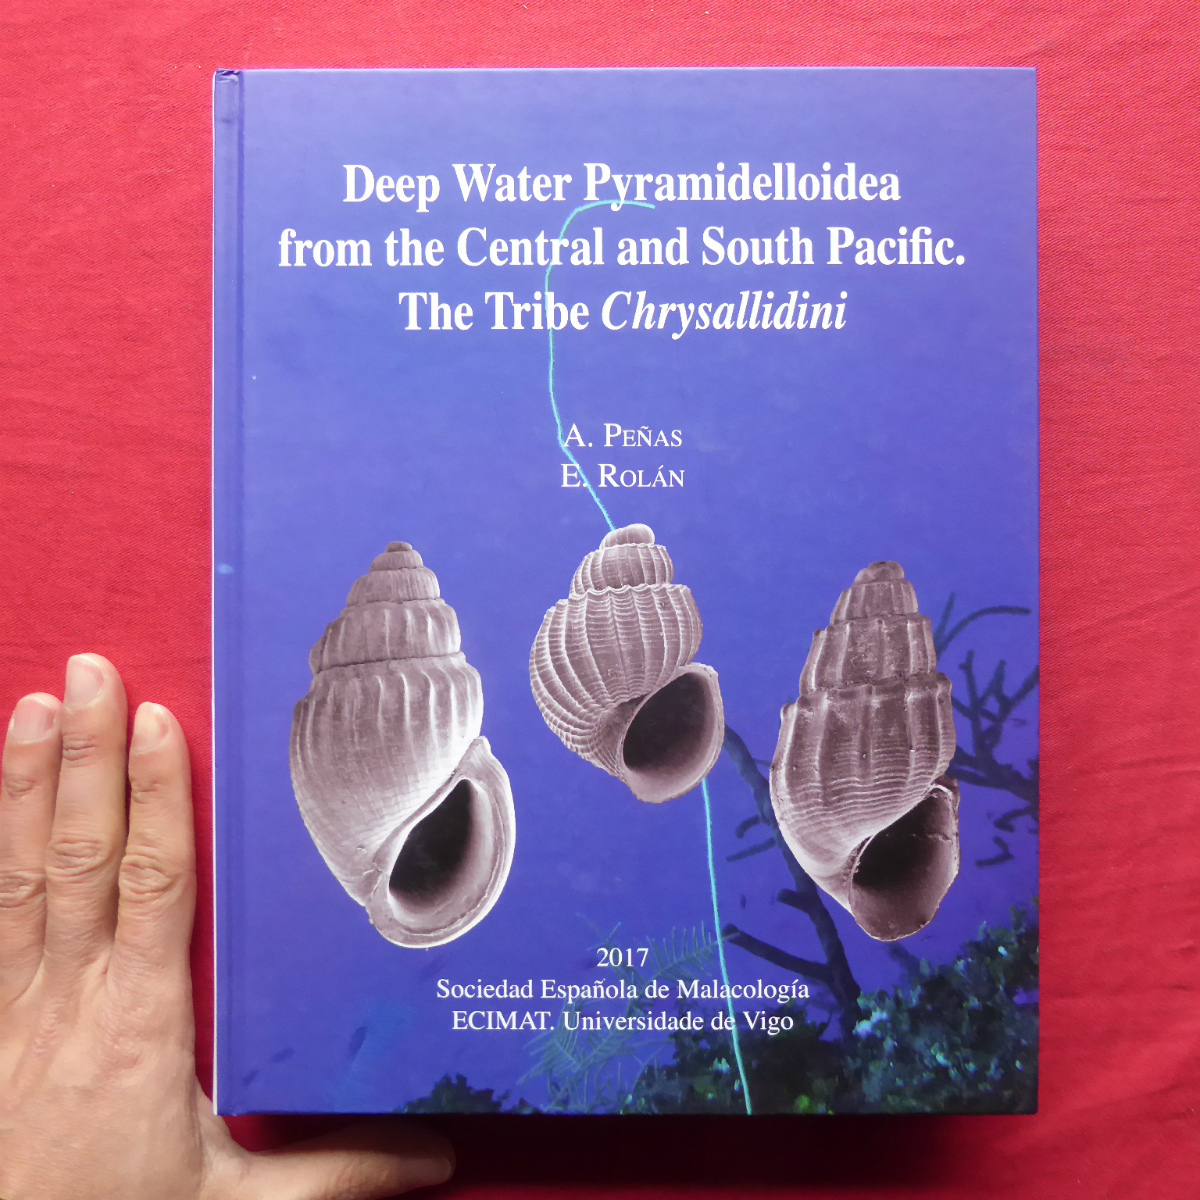 a13洋書【中央および南太平洋からの深海ピラミデロイデア/Deep Water Pyramidelloidea from the Central and South Pacific.】 @4